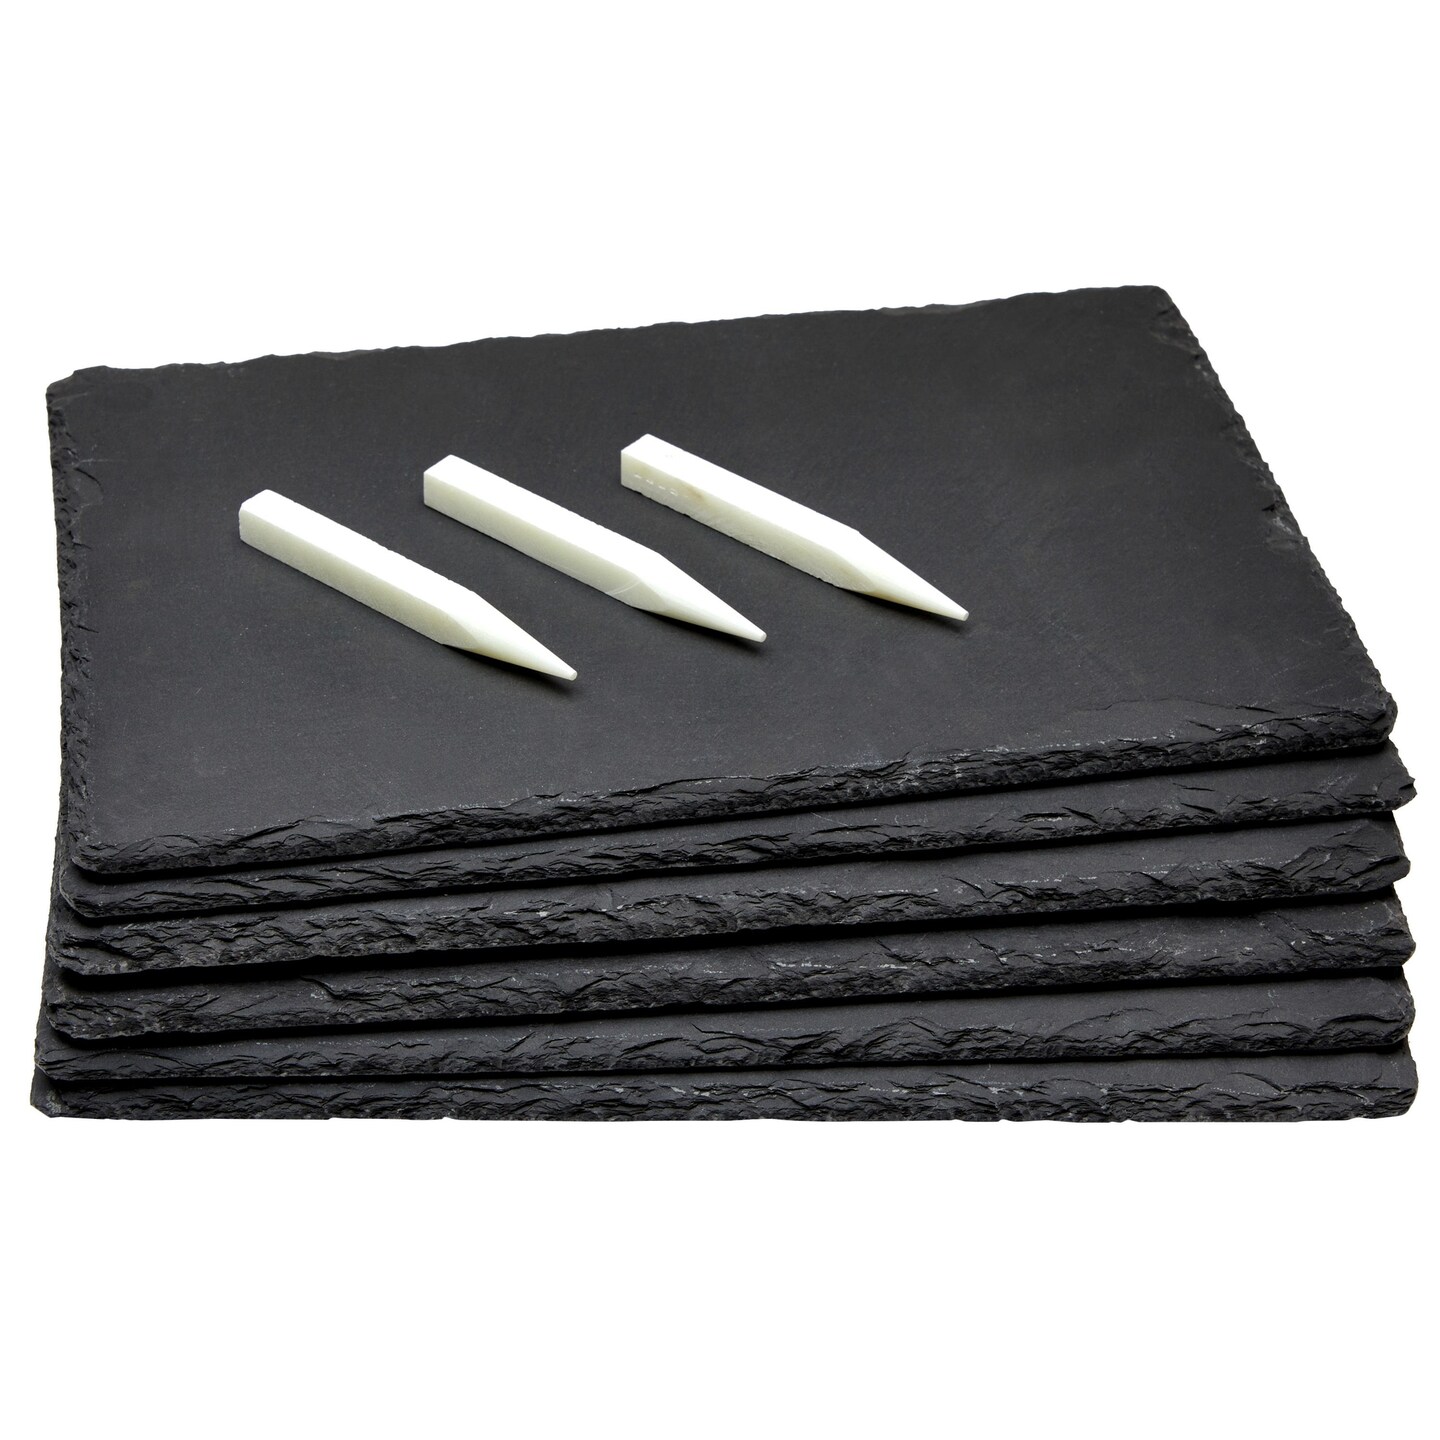 Set of 6 Black Slate Charcuterie Boards with Chalk, Individual Stone Plates for Cheese, Meat, Appetizers (8 x 11.8 In)